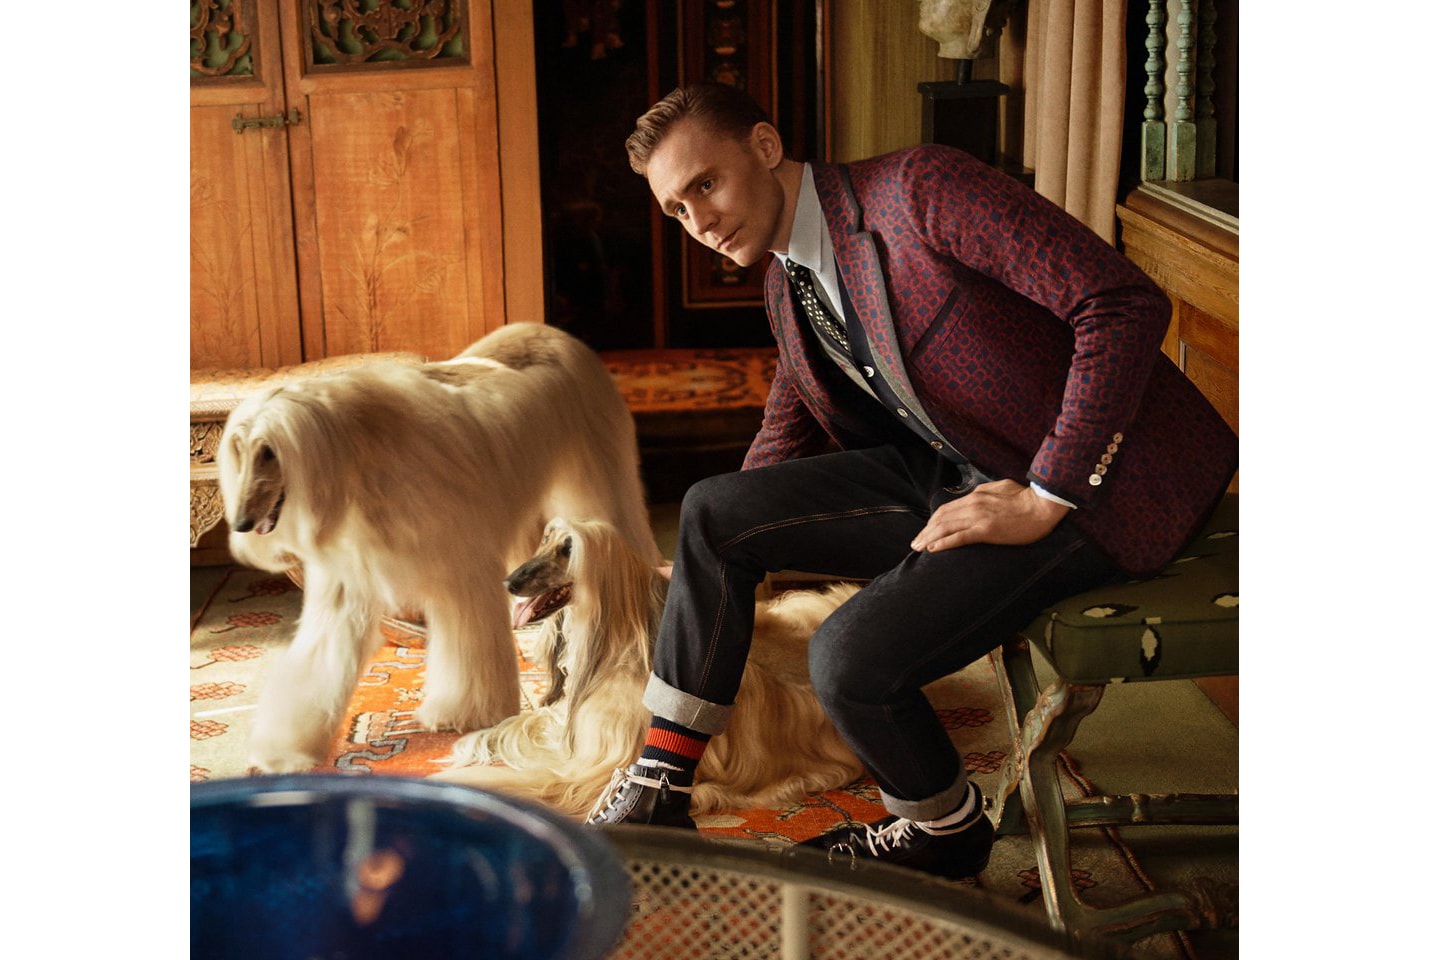 Tom Hiddleston Models for New Gucci Campaign Ads dog Taylor Swift Cruise 2017